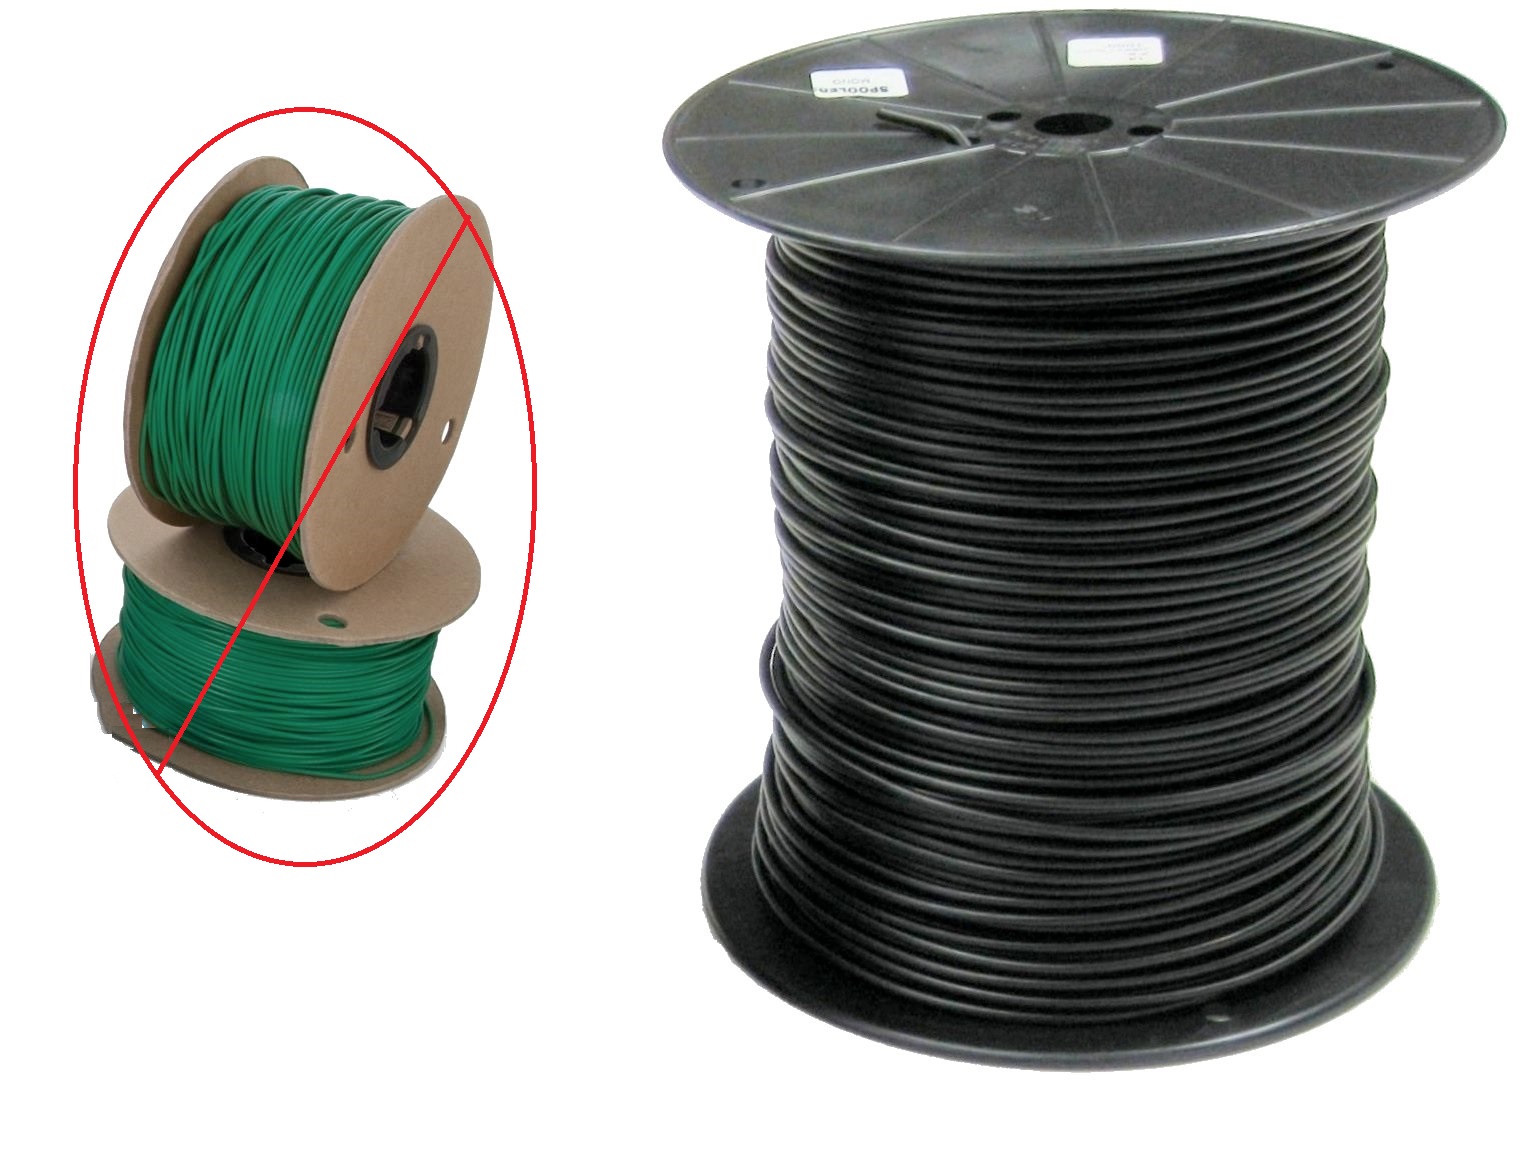 16-Gauge Wire Upgrade for SDF-100A or SDF-CT